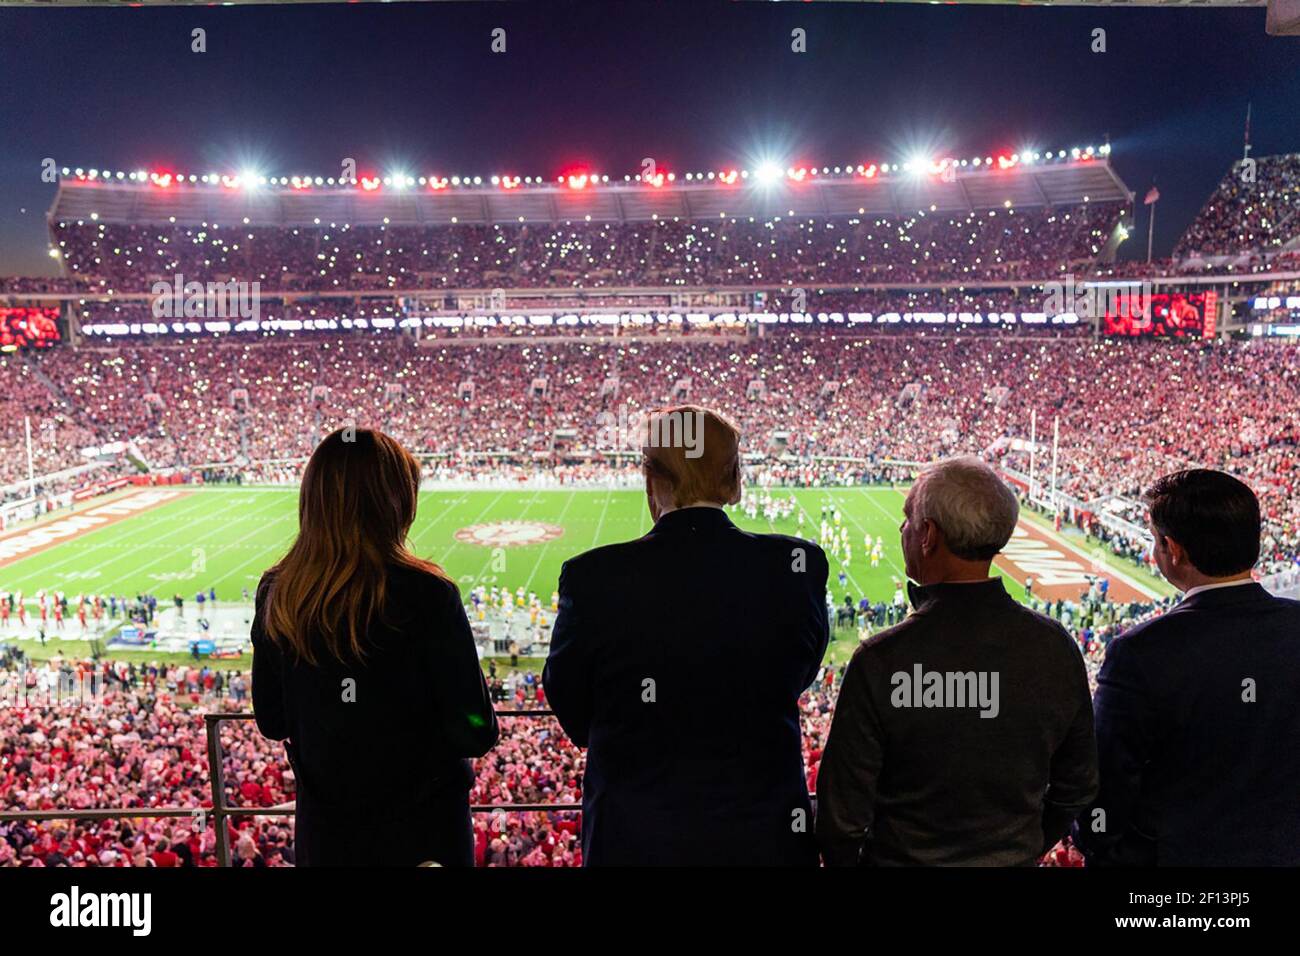 President Donald Trump and First Lady Melania Trump watch the action on the field at Bryant-Denny Stadium Saturday Nov. 9 2019 while attending the University of Alabama -Louisiana State University football game in Tuscaloosa Ala. Stock Photo